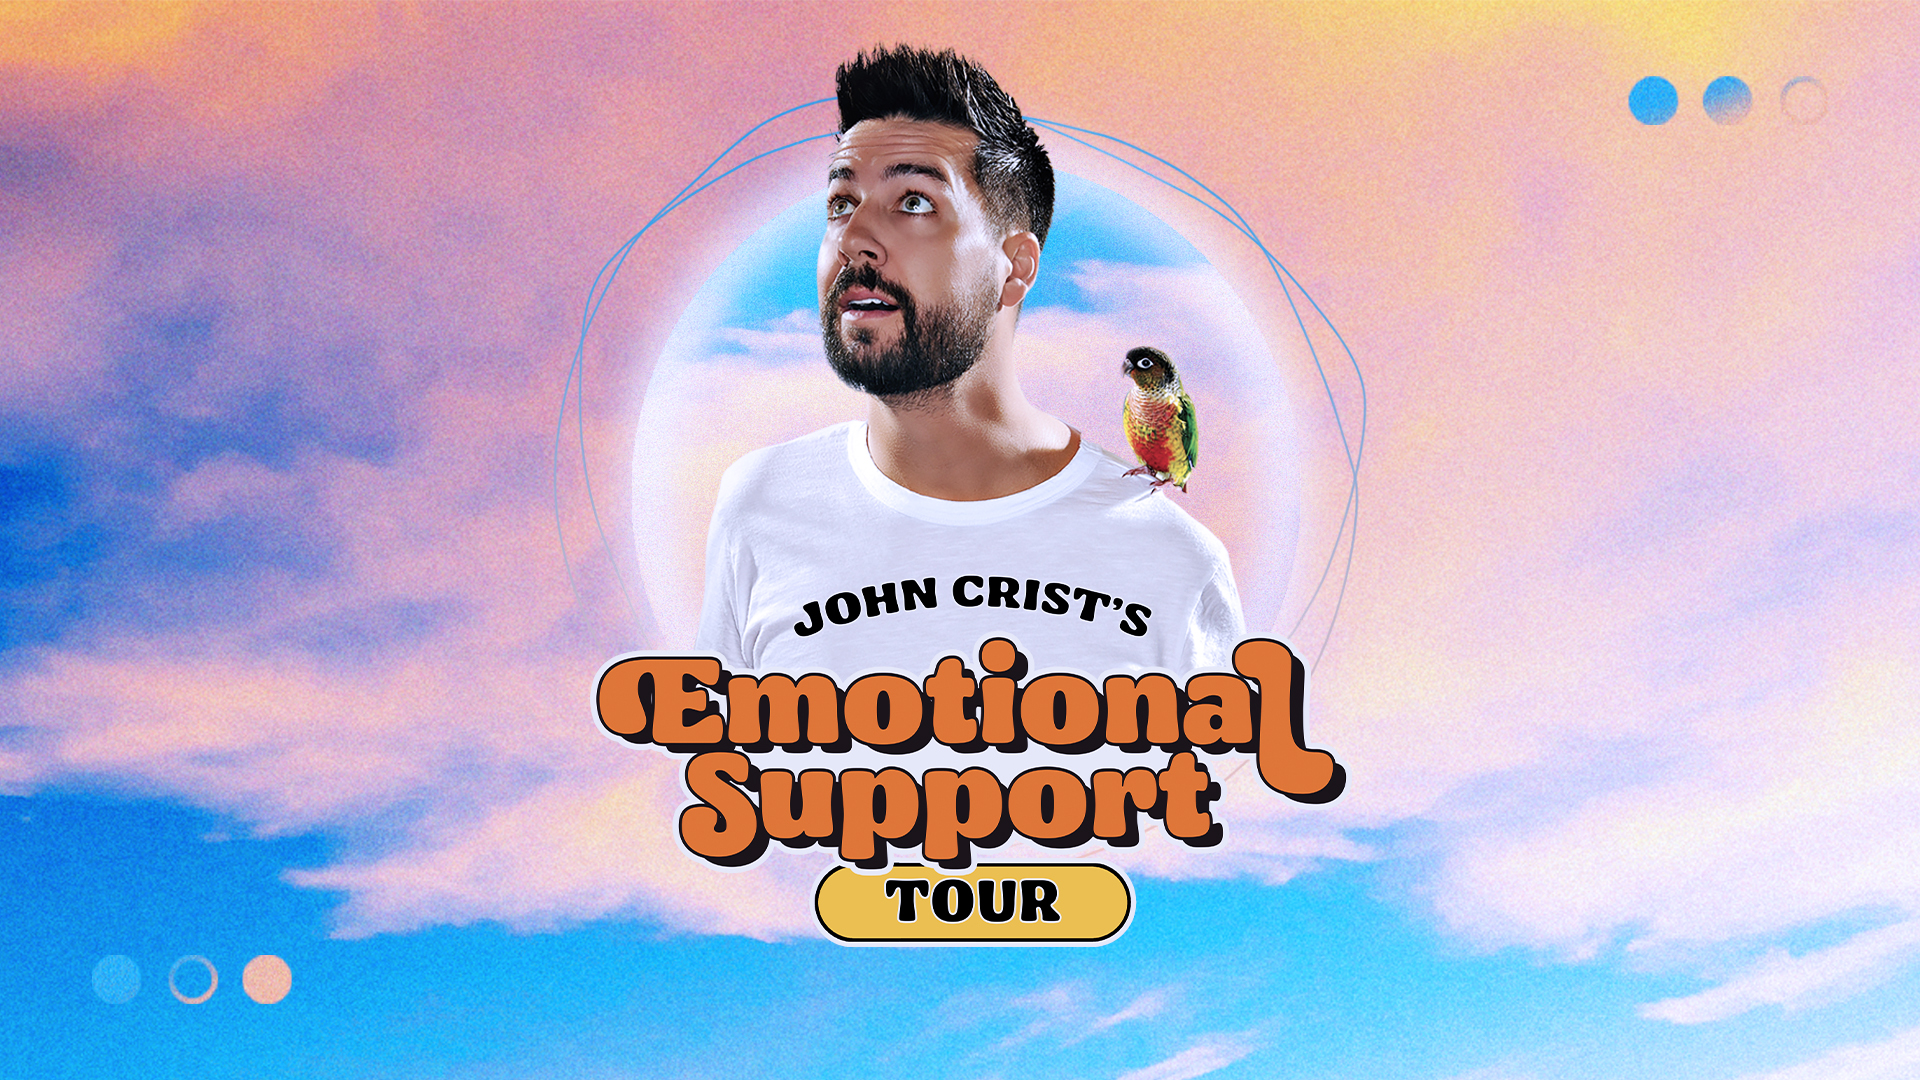 Show image to promote comedian John Crist's Emotional Support Tour at the Appell Center on November 17th, 2023 at 7:30 p.m.